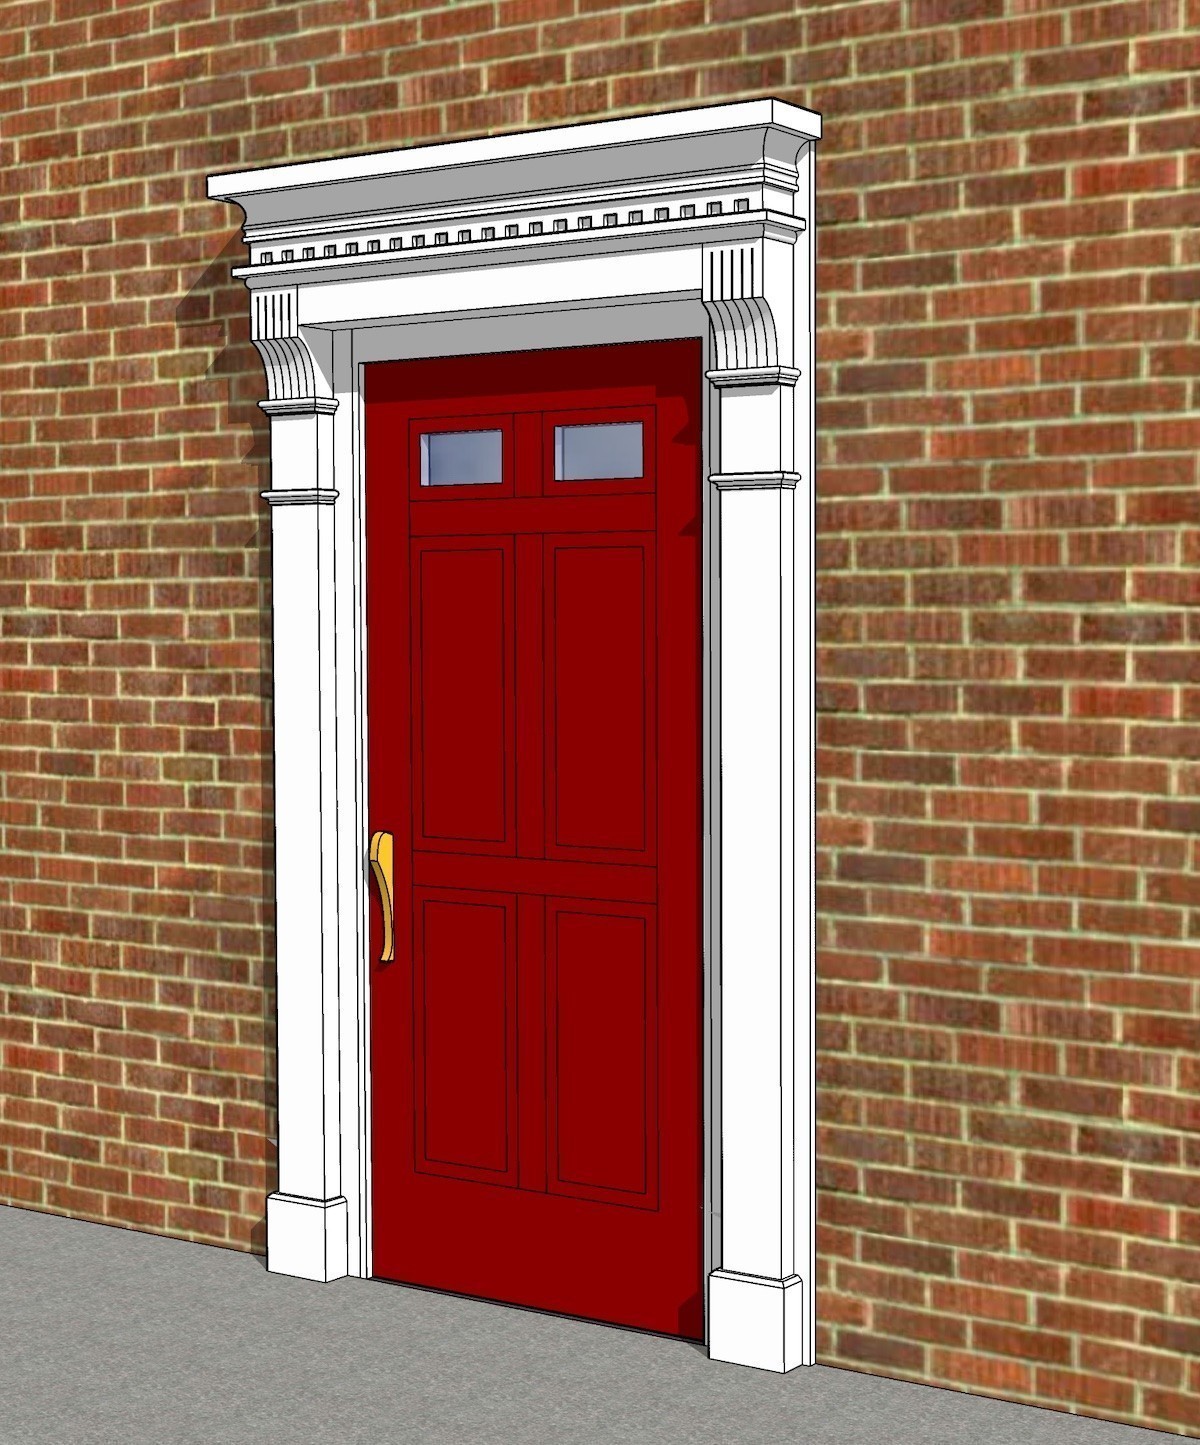 Pilasters framing a red door